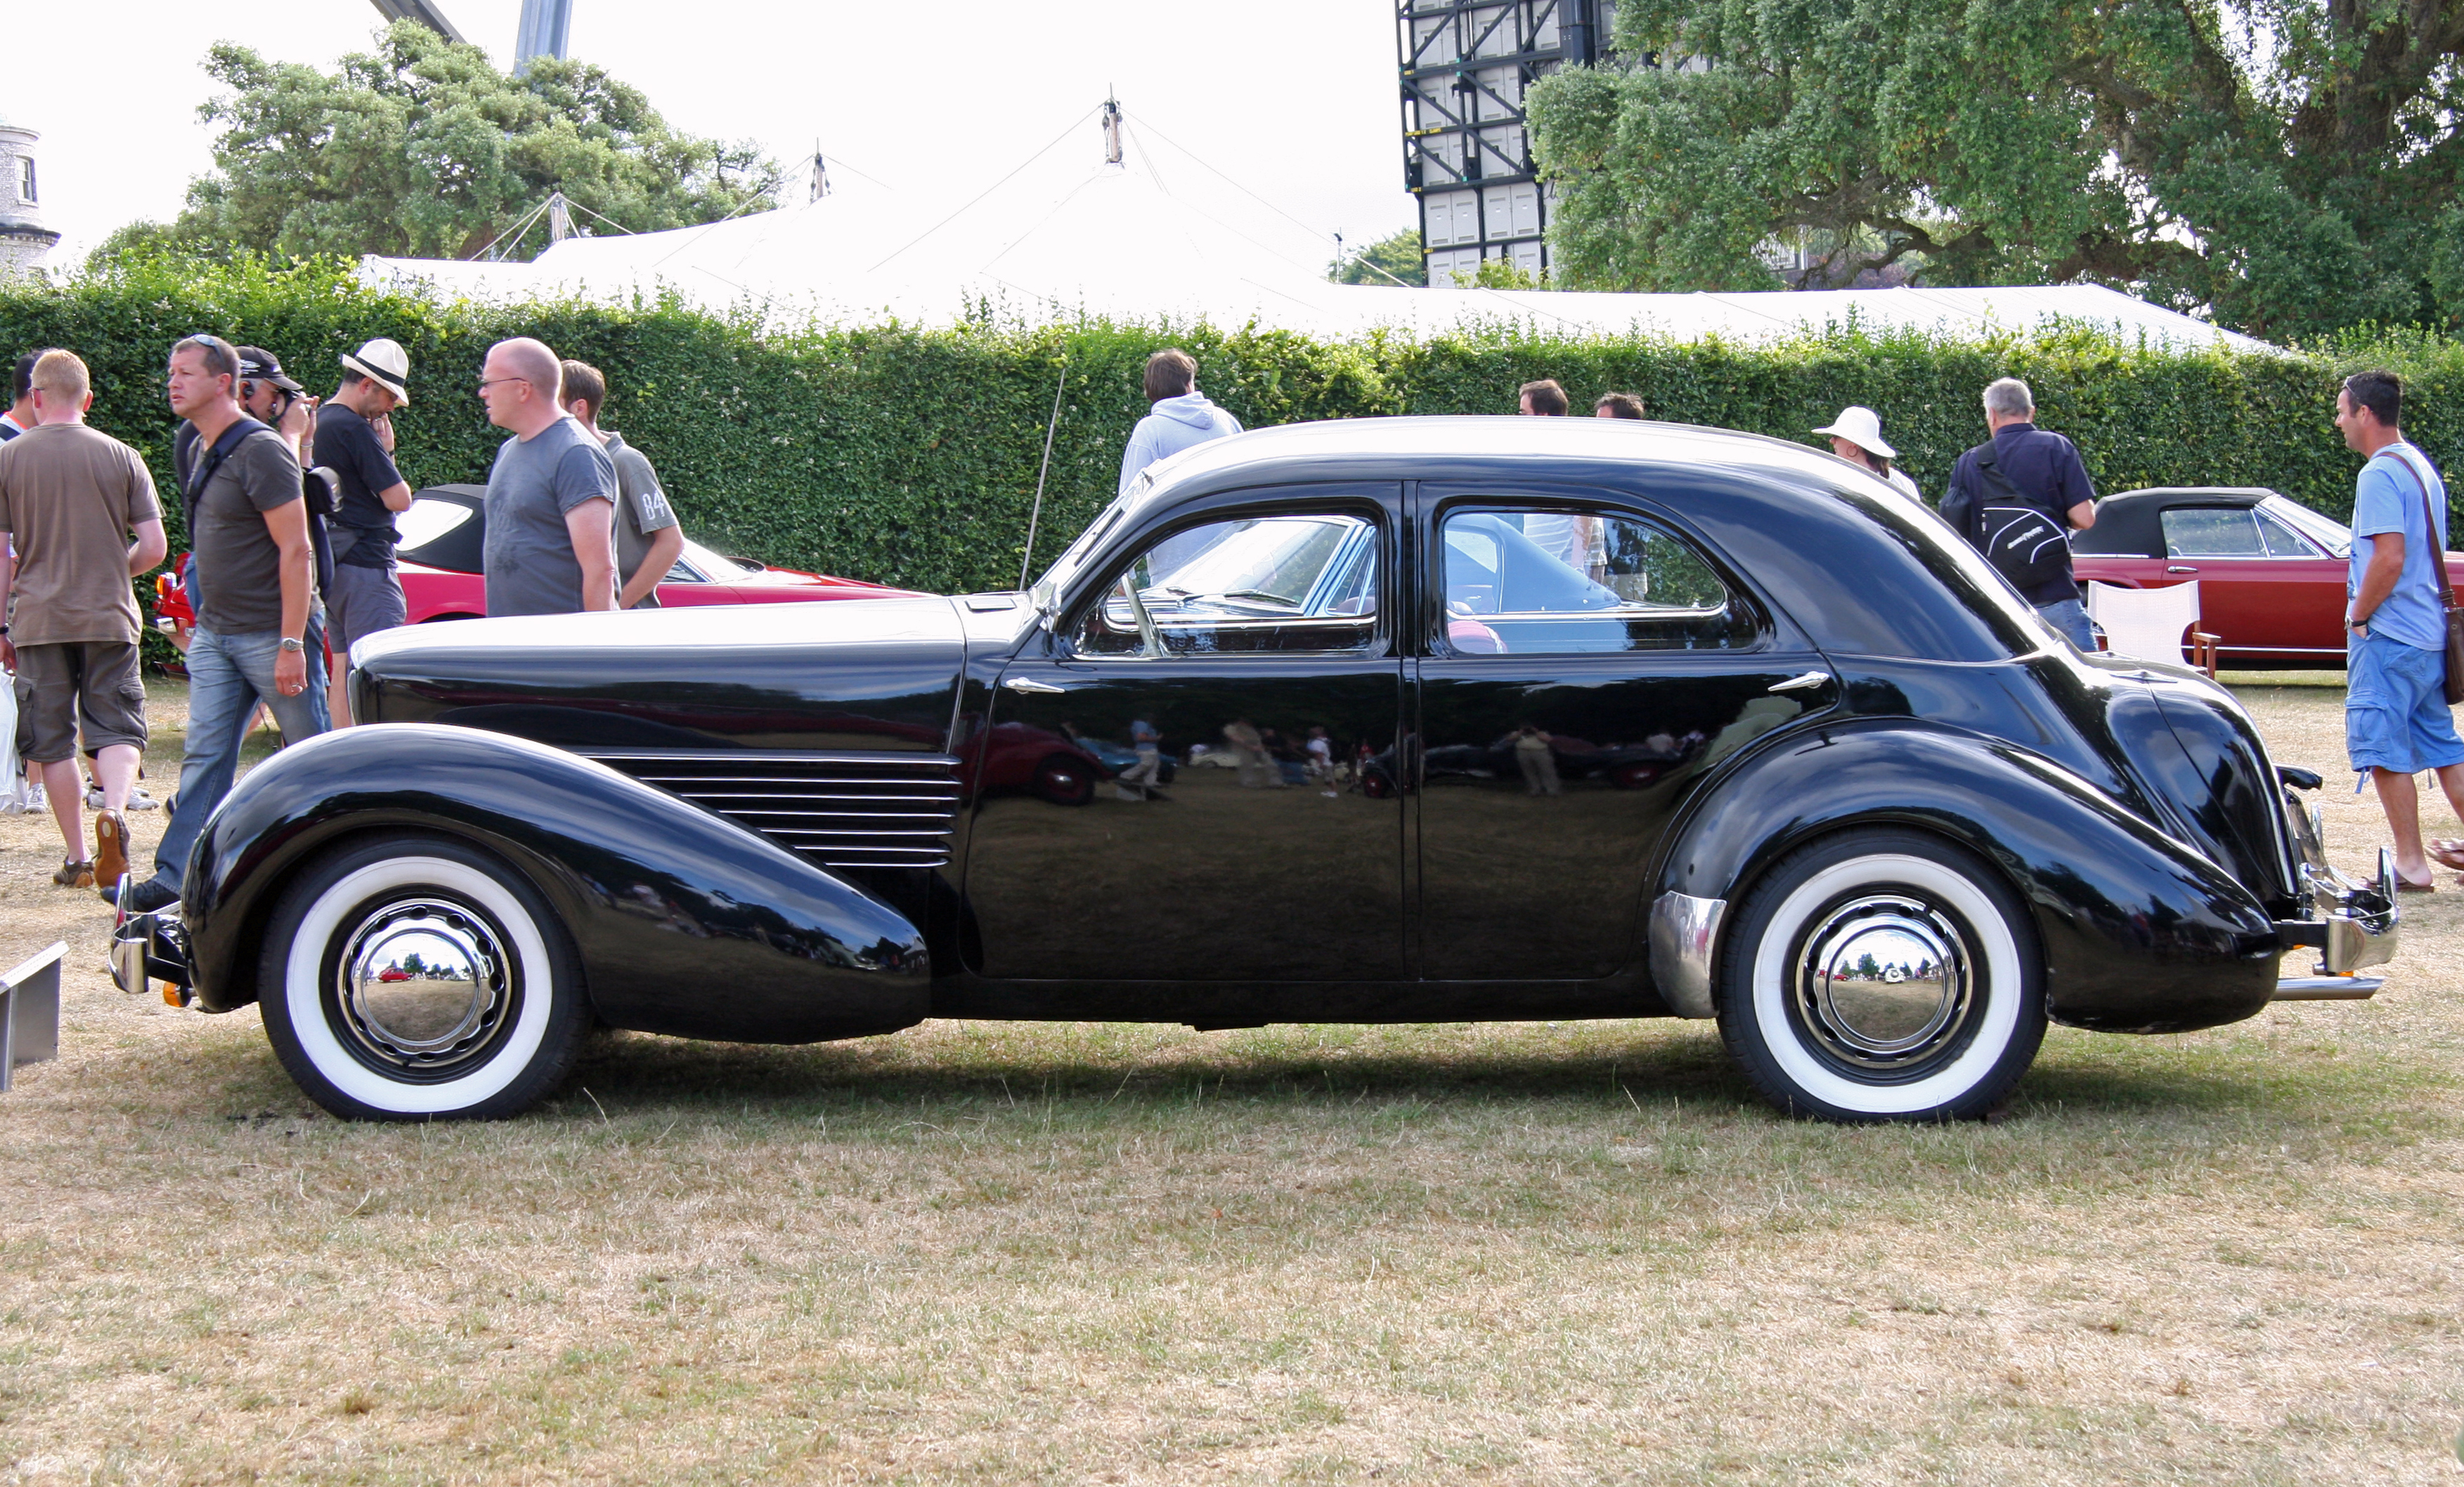 File:1937 Cord 812 Beverly - Flickr - exfordy.jpg - Wikimedia Commons